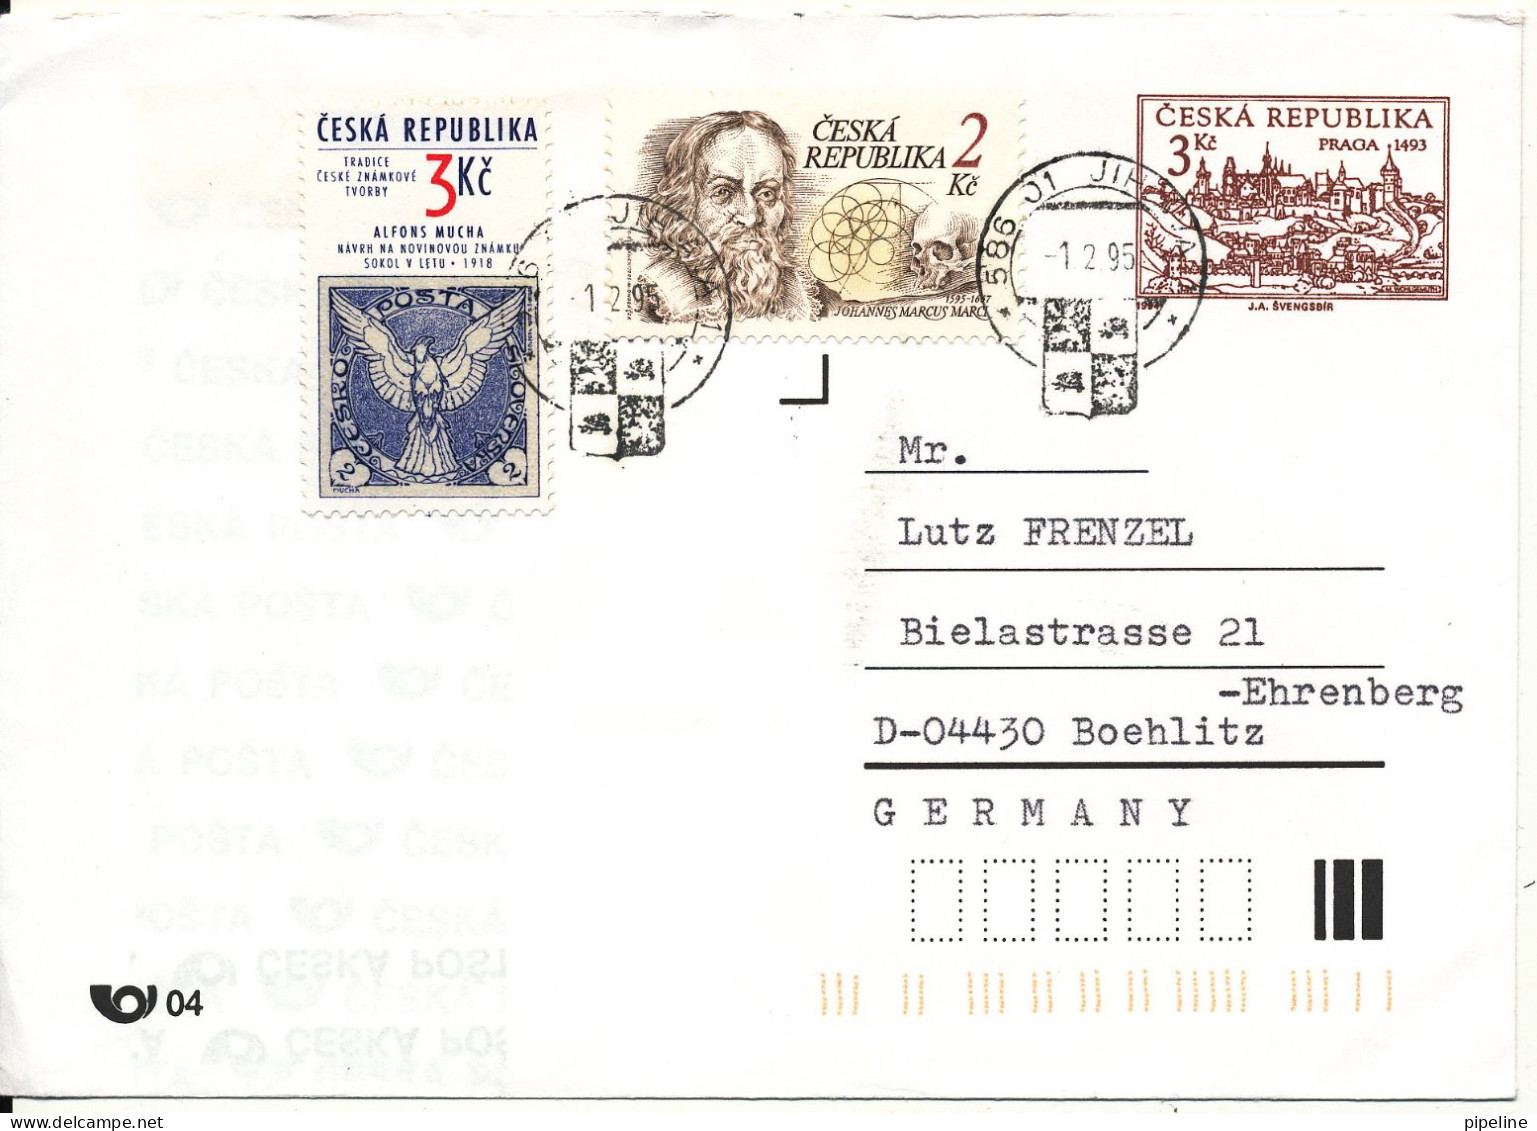 Czech Republic Uprated Postal Stationery Cover Sent To Germany 1-2-1995 - Covers